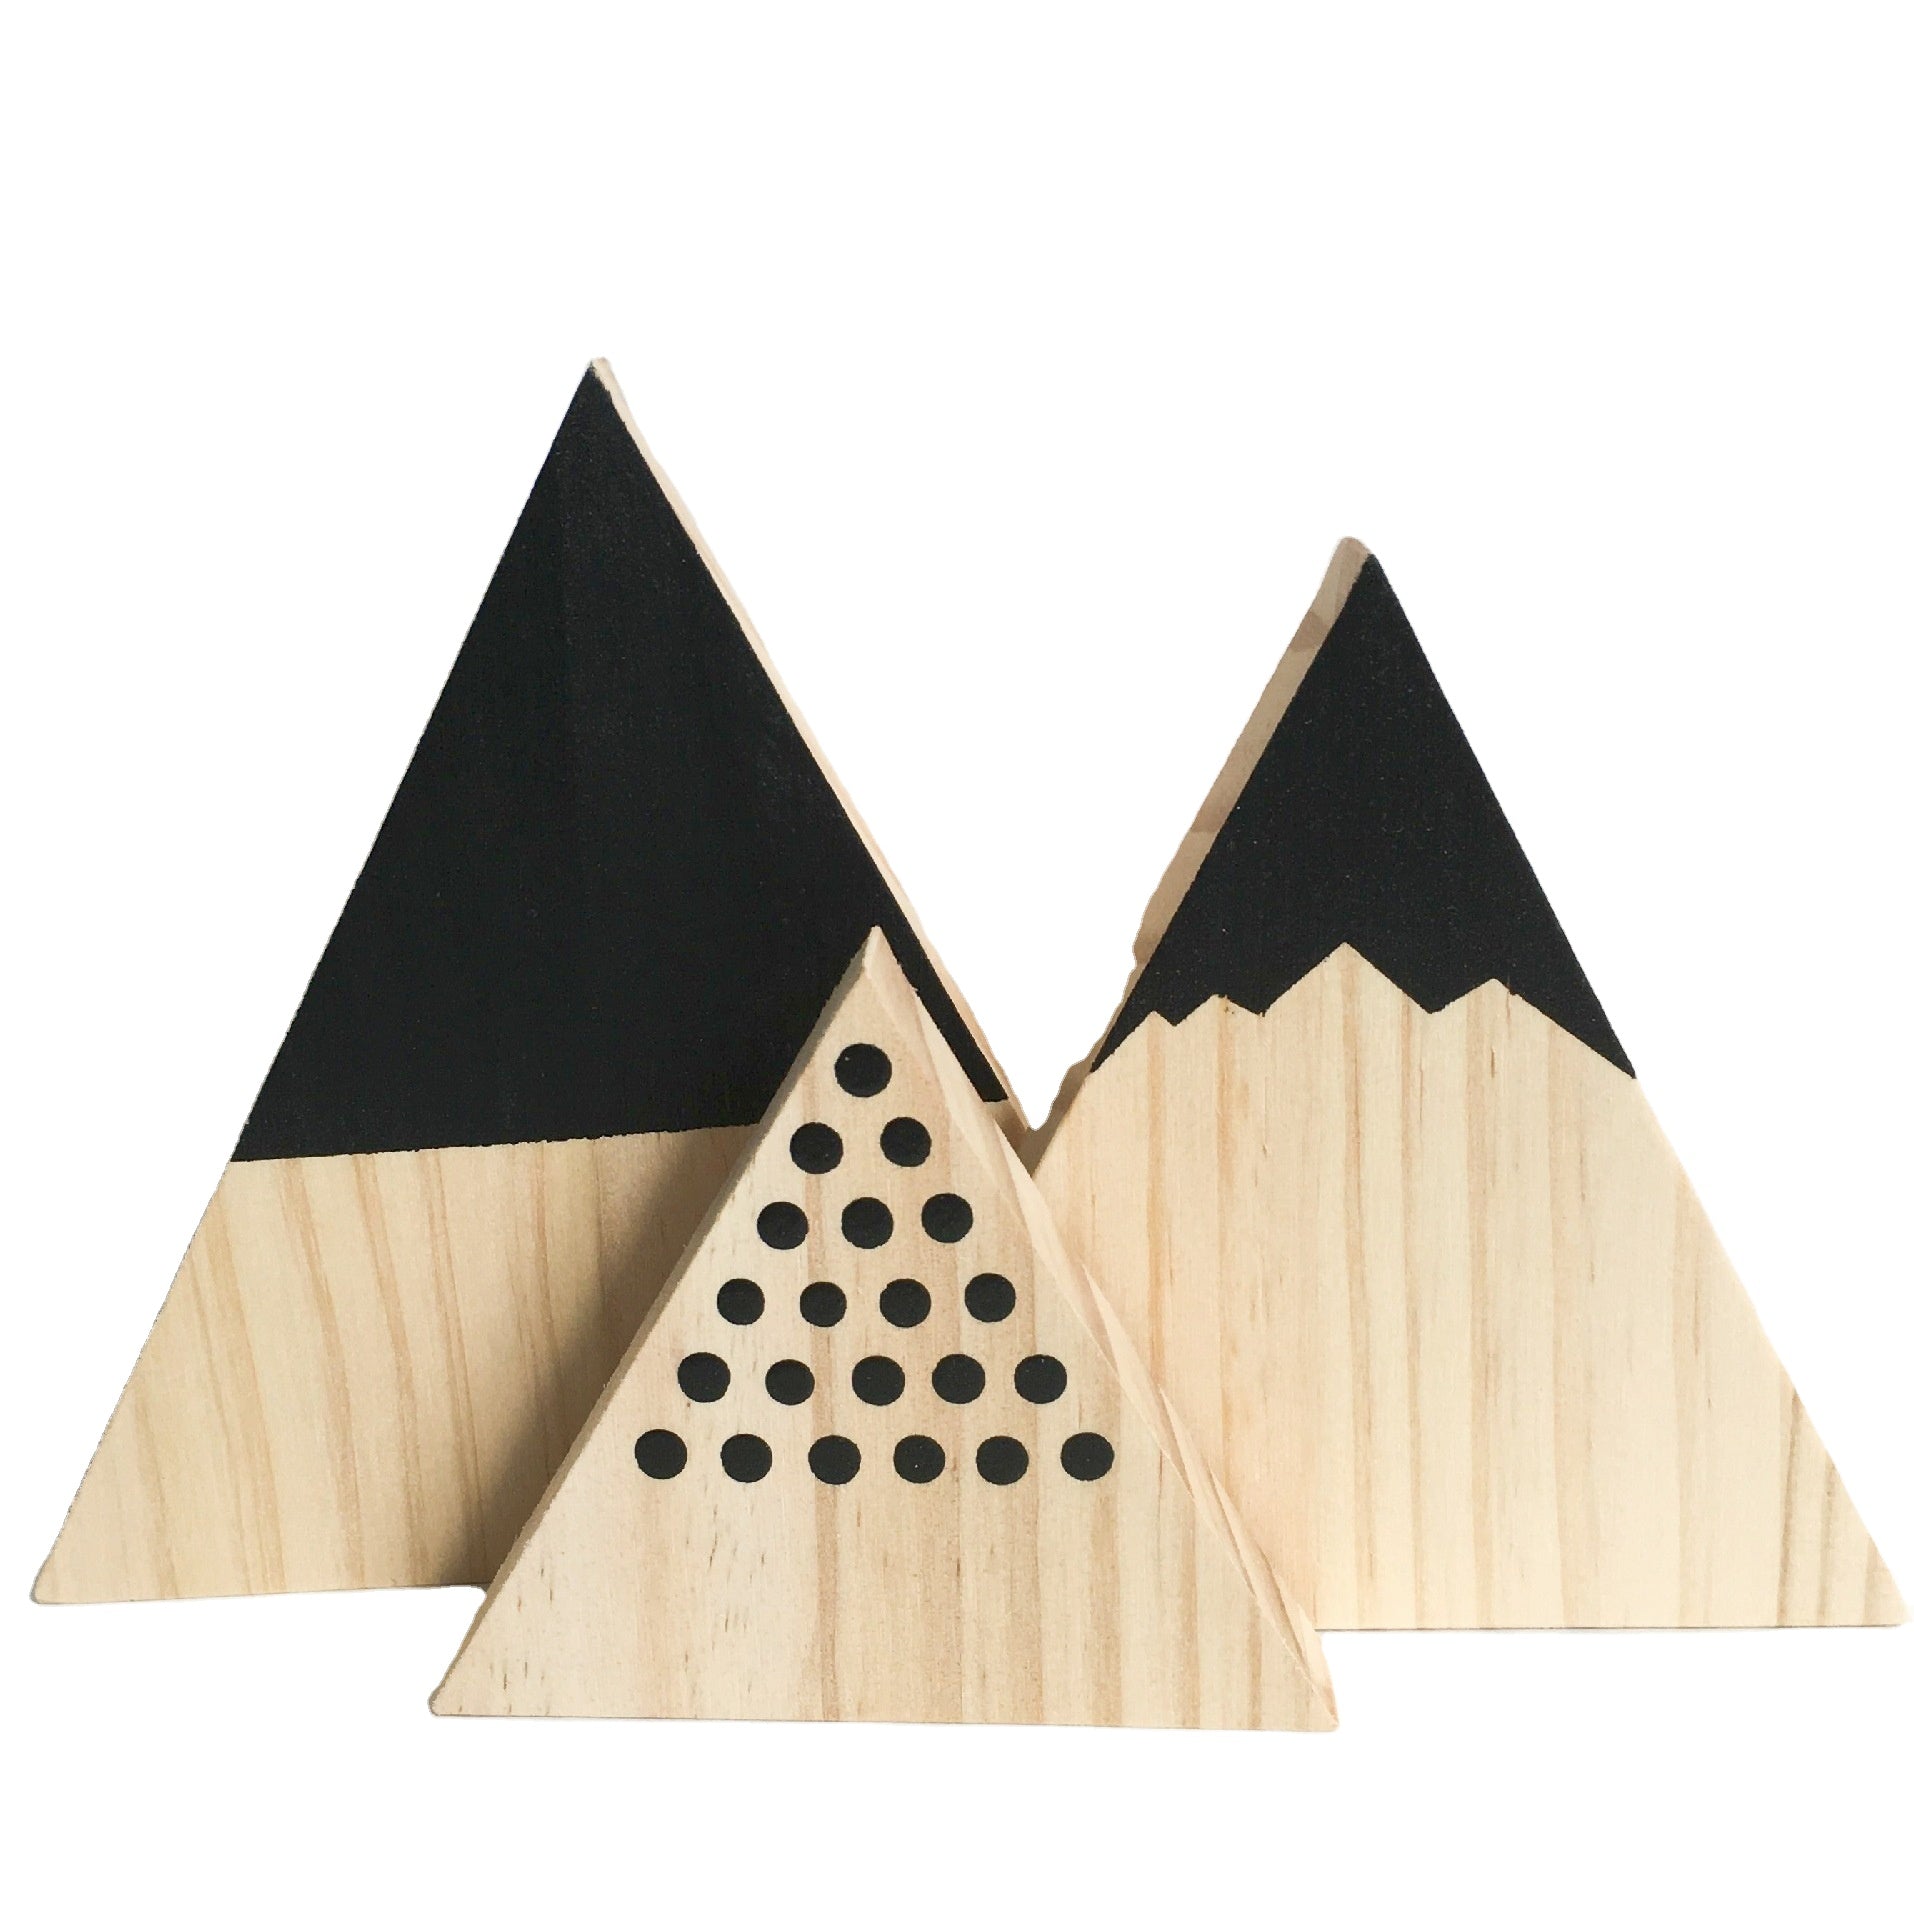 Set of 3 nordic wooden snow mountain triangle ornaments - baby nursery decor